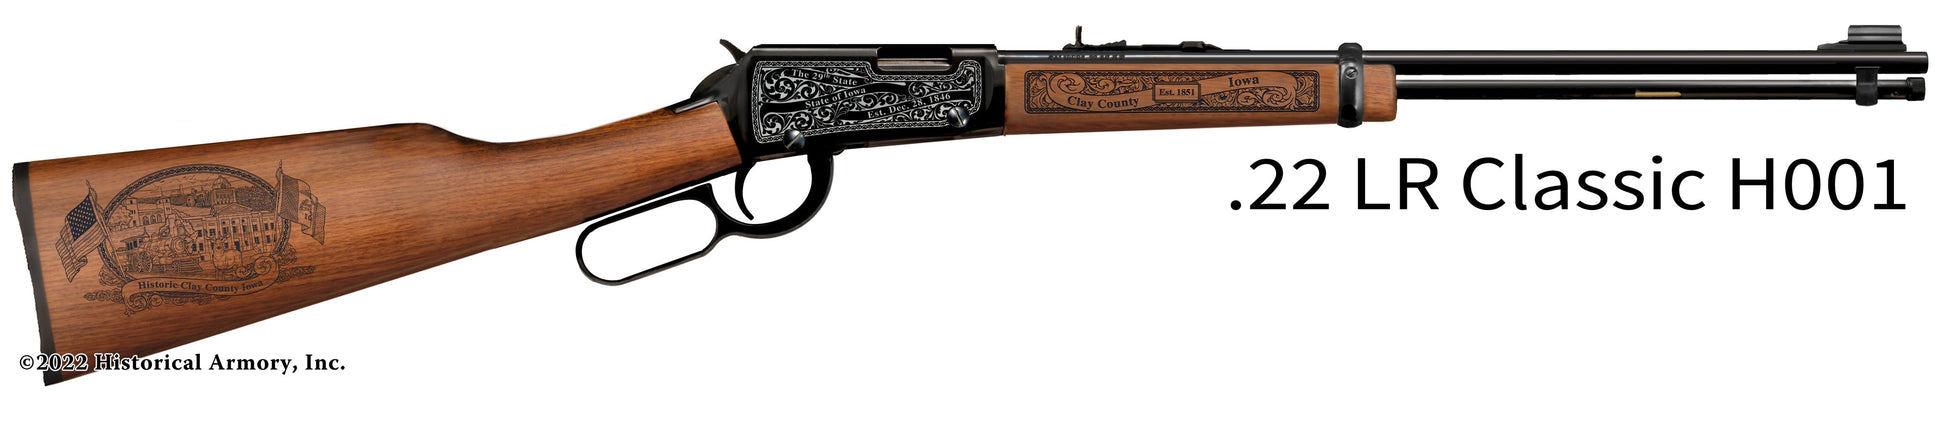 Clay County Iowa Engraved Henry H001 Rifle